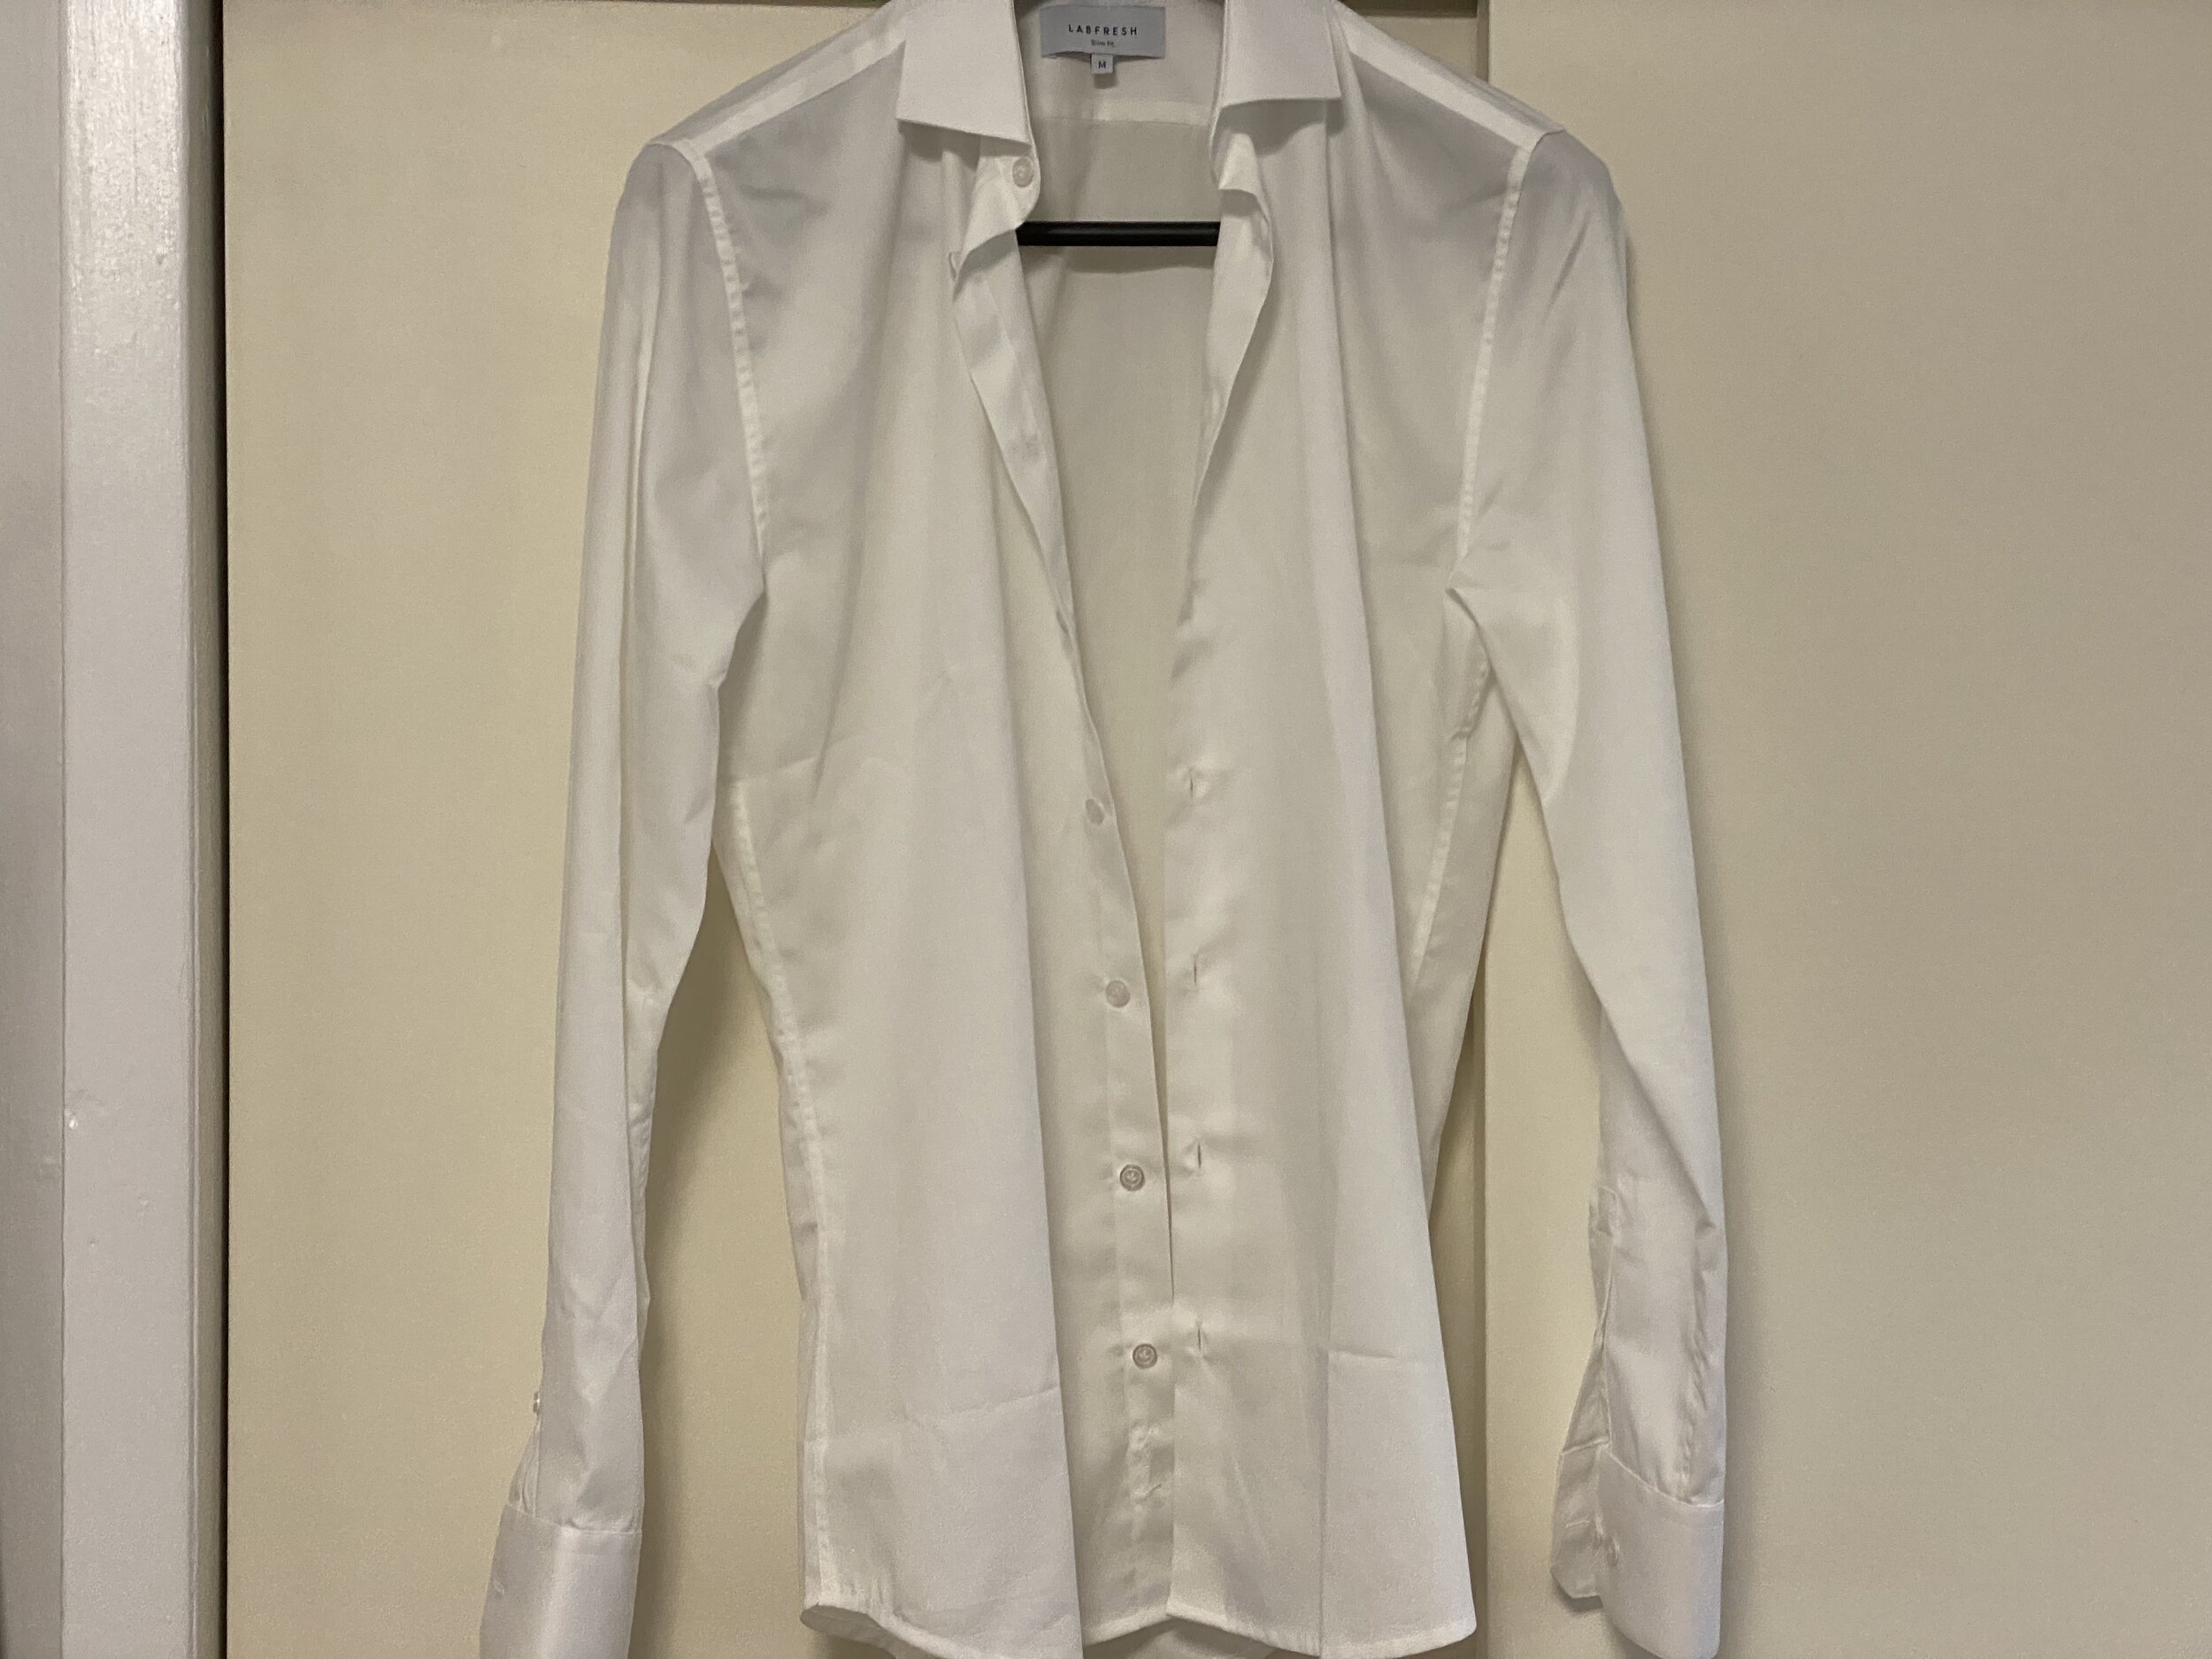 The Stain-Proof, Stretchy, Non-Iron, Magical Dress Shirt From LABFRESH ...